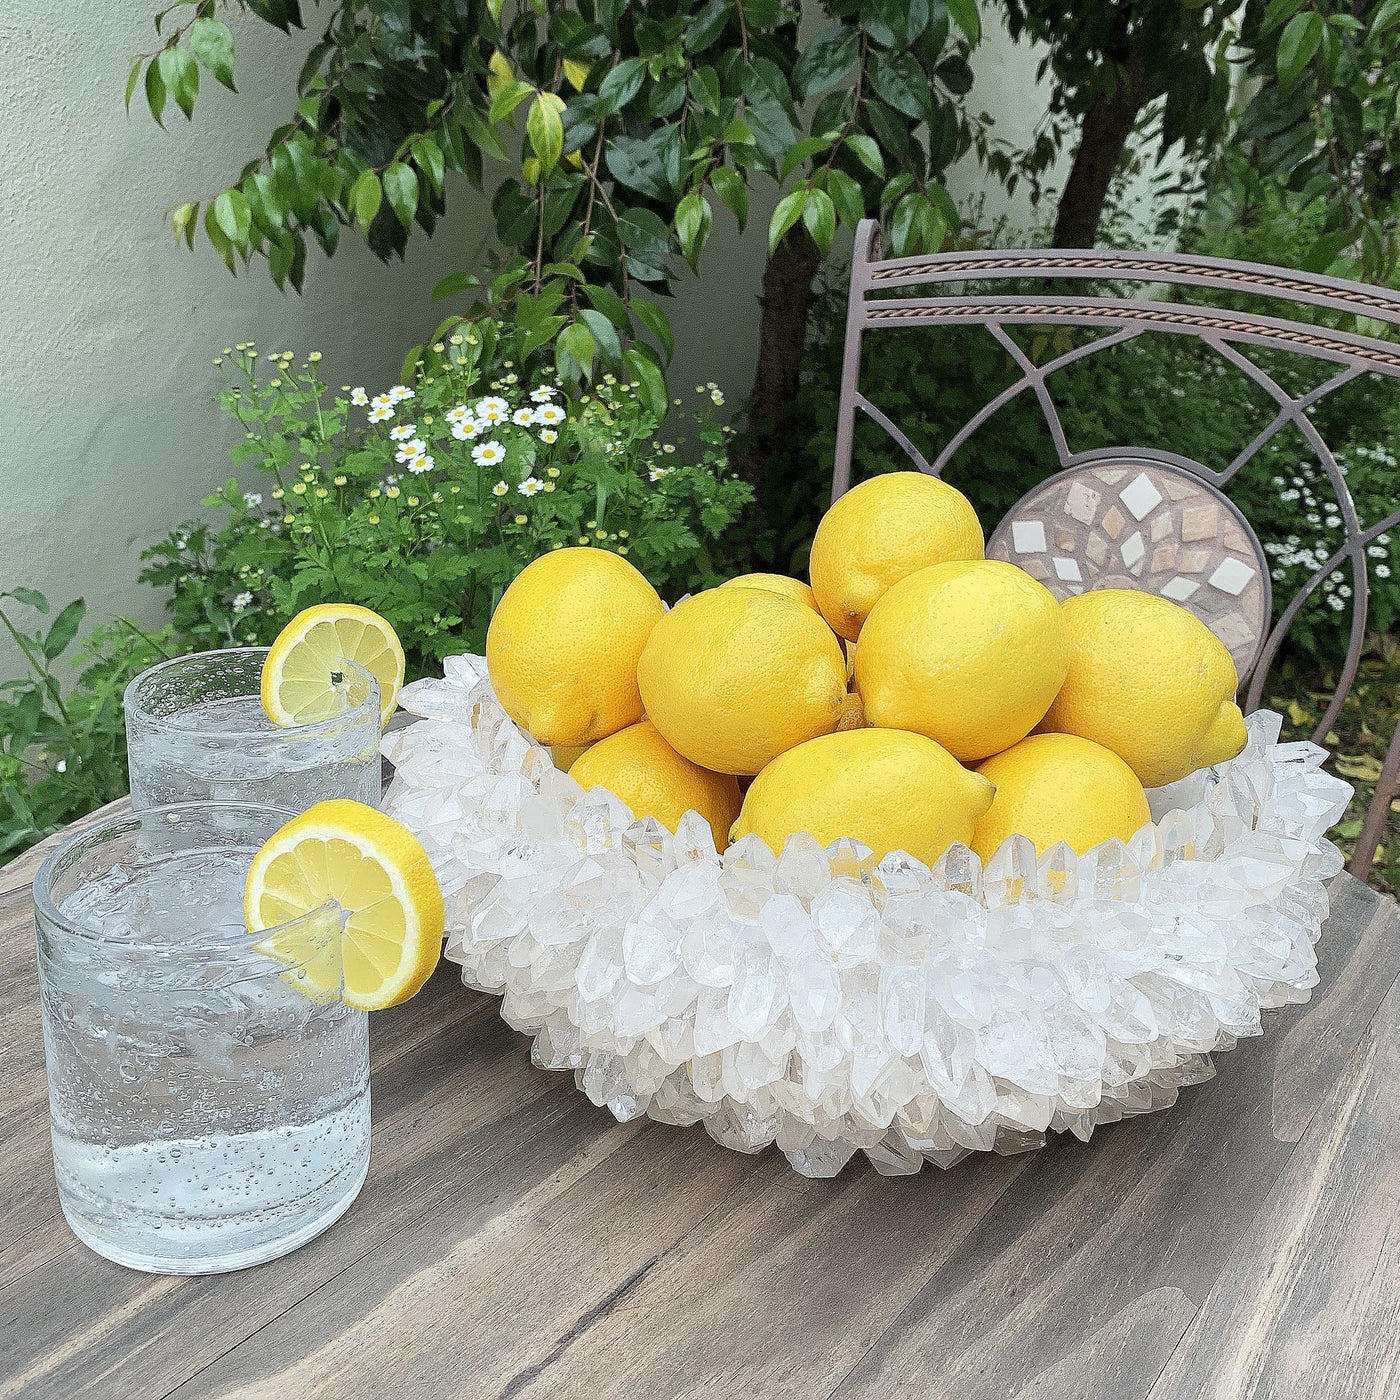 crystal point bowl with lemons in it